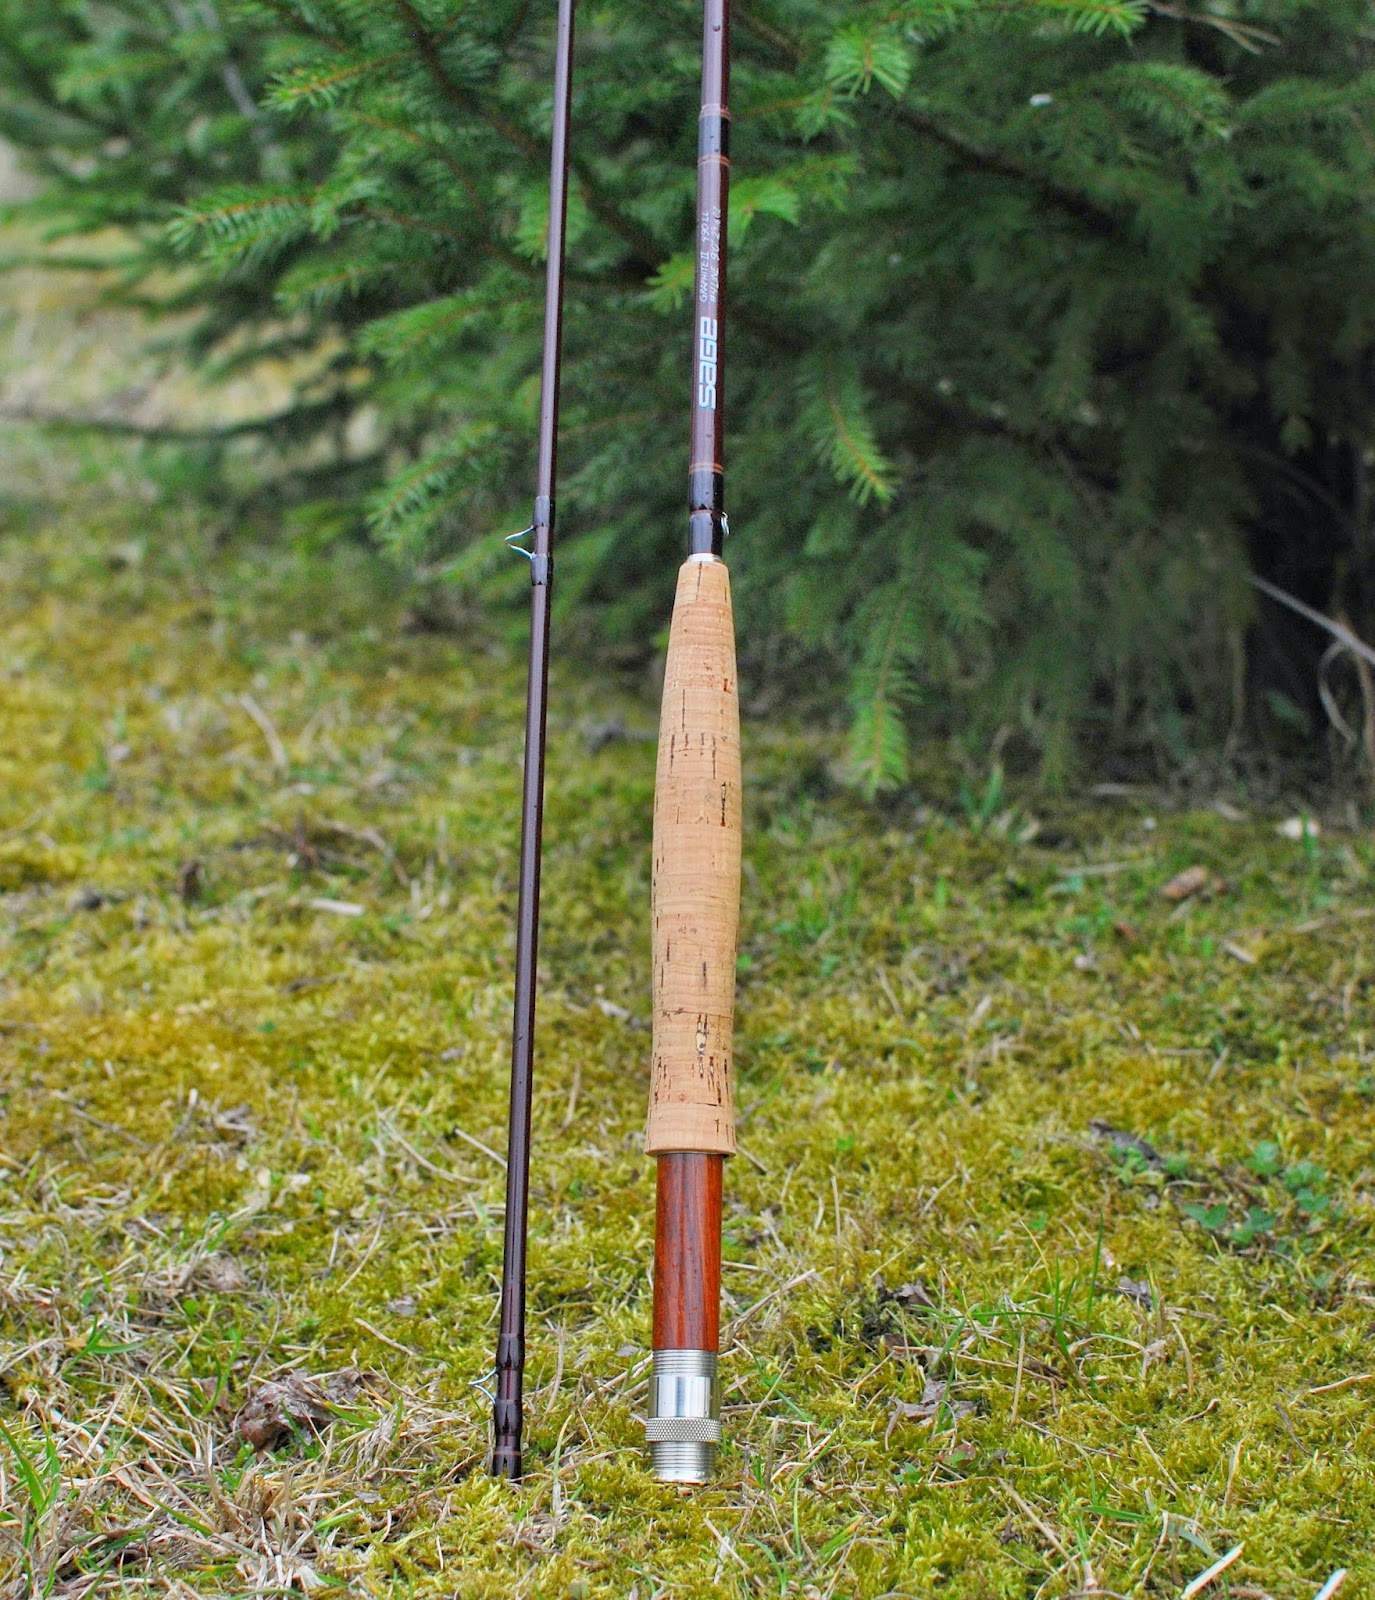 Handcrafted graphite and fiberglass fly rods: Sage 490 LL. A classic  revamped.